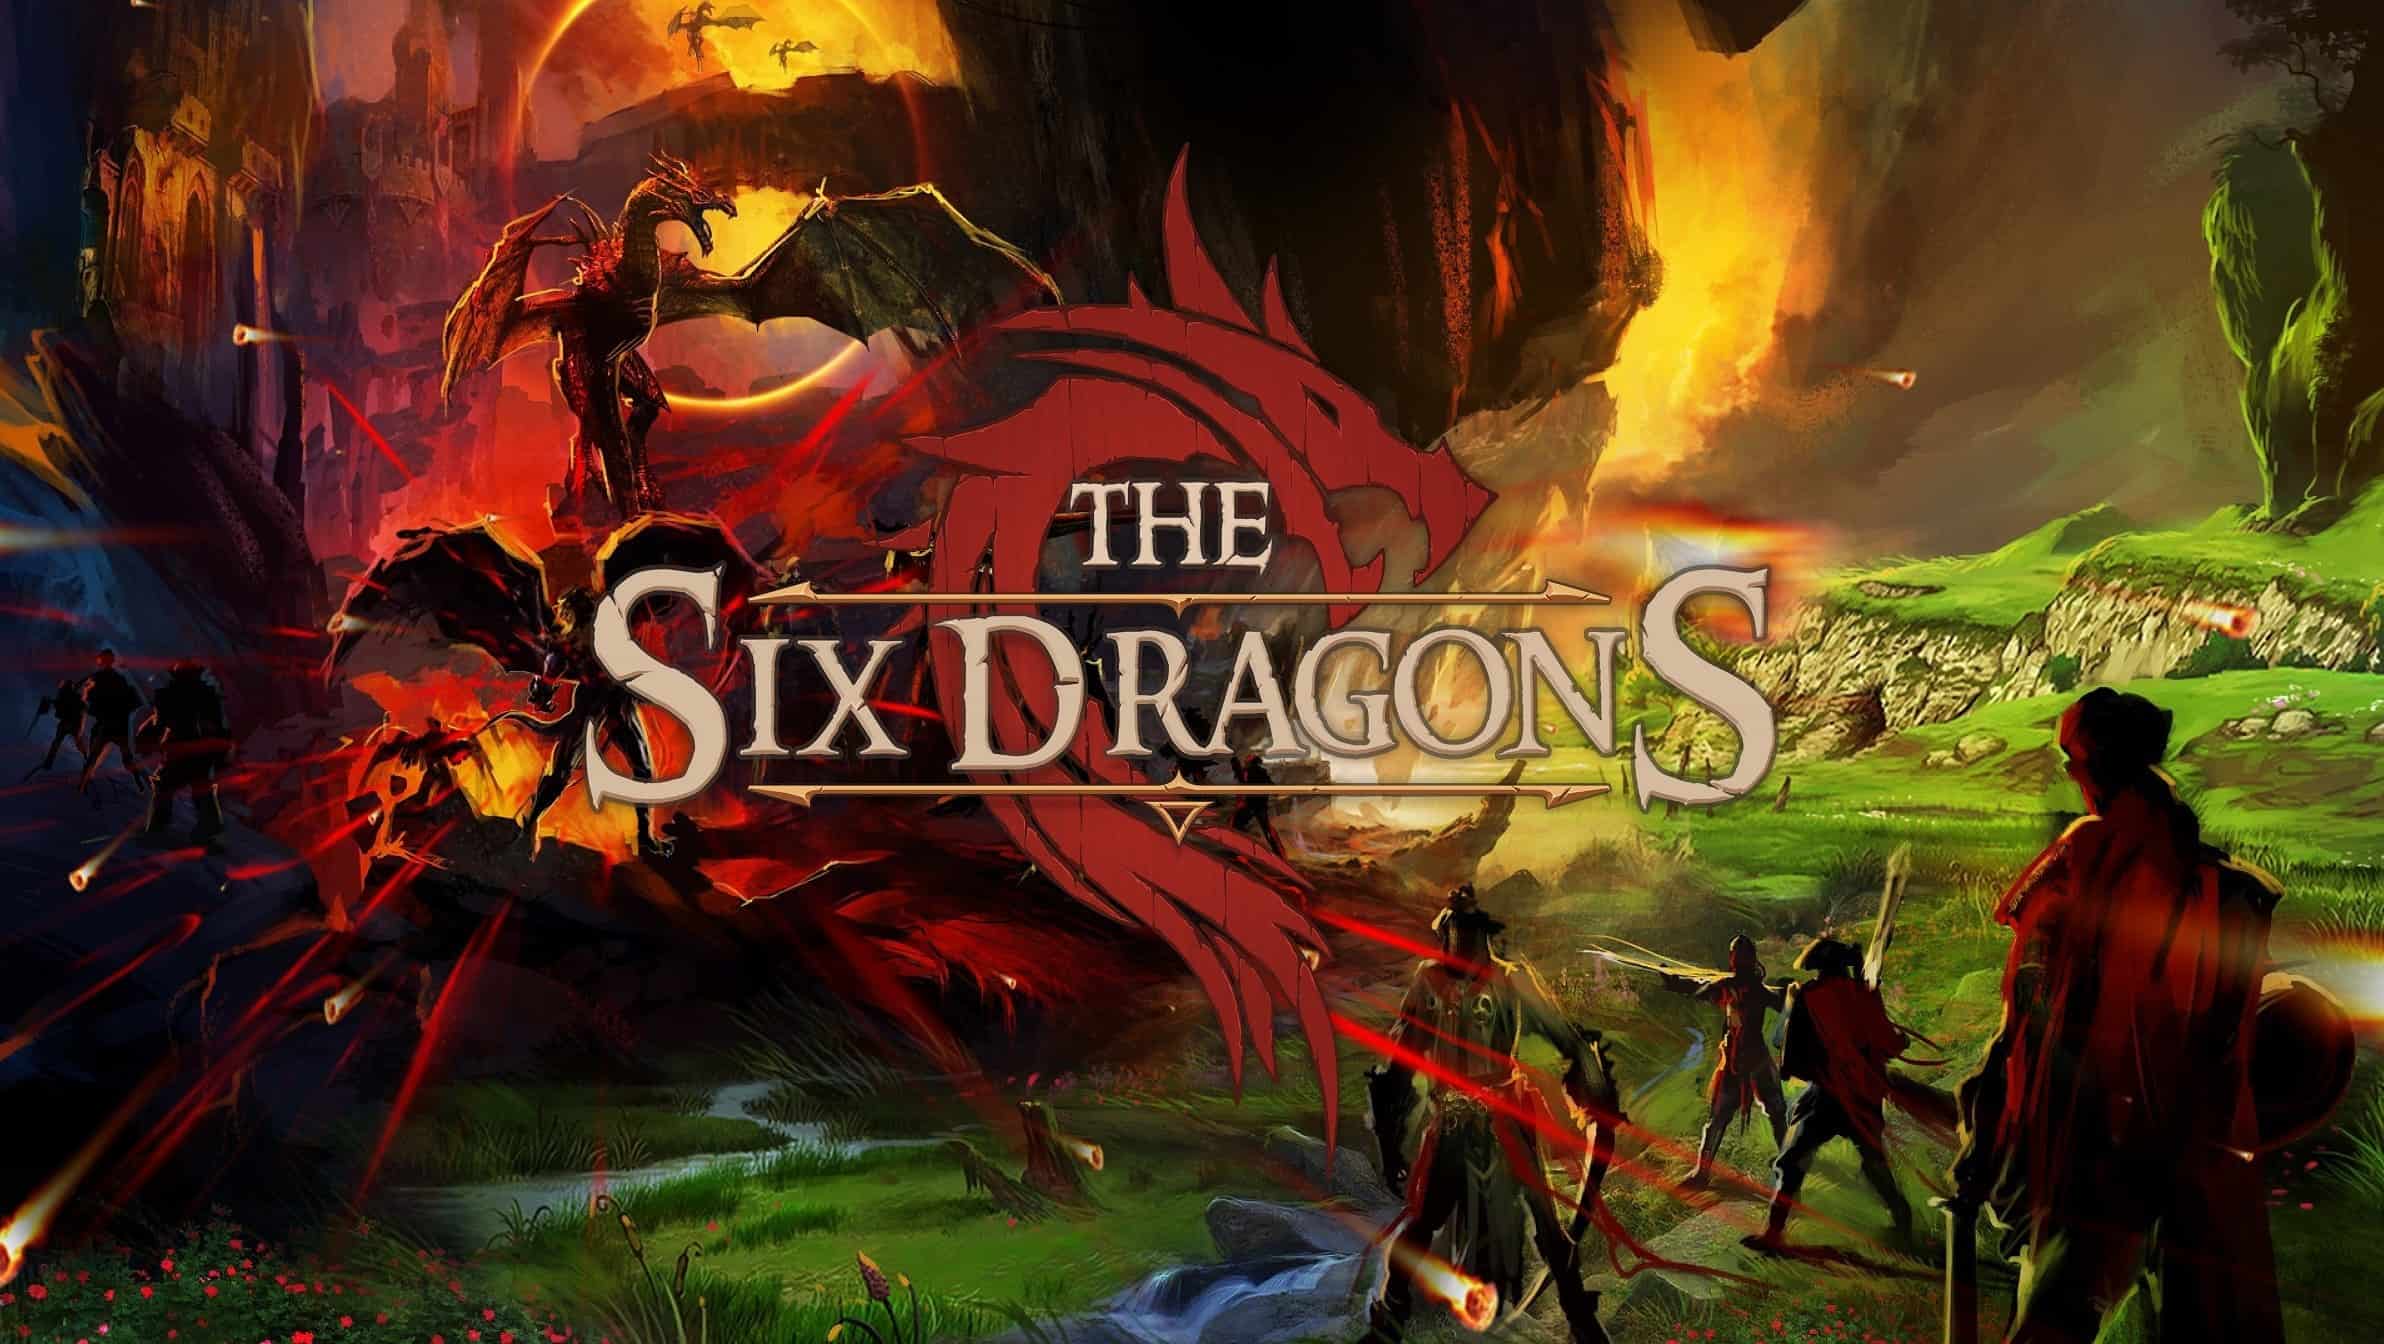 SixDragons Enjin Multiverse Blockchain Crypto Games Dekaron M is a PC MMORPG that was first released in 2004 and published by Nexon. Now, the game is being rebranded as Dekaron G as they plan to bring blockchain features into the game. 